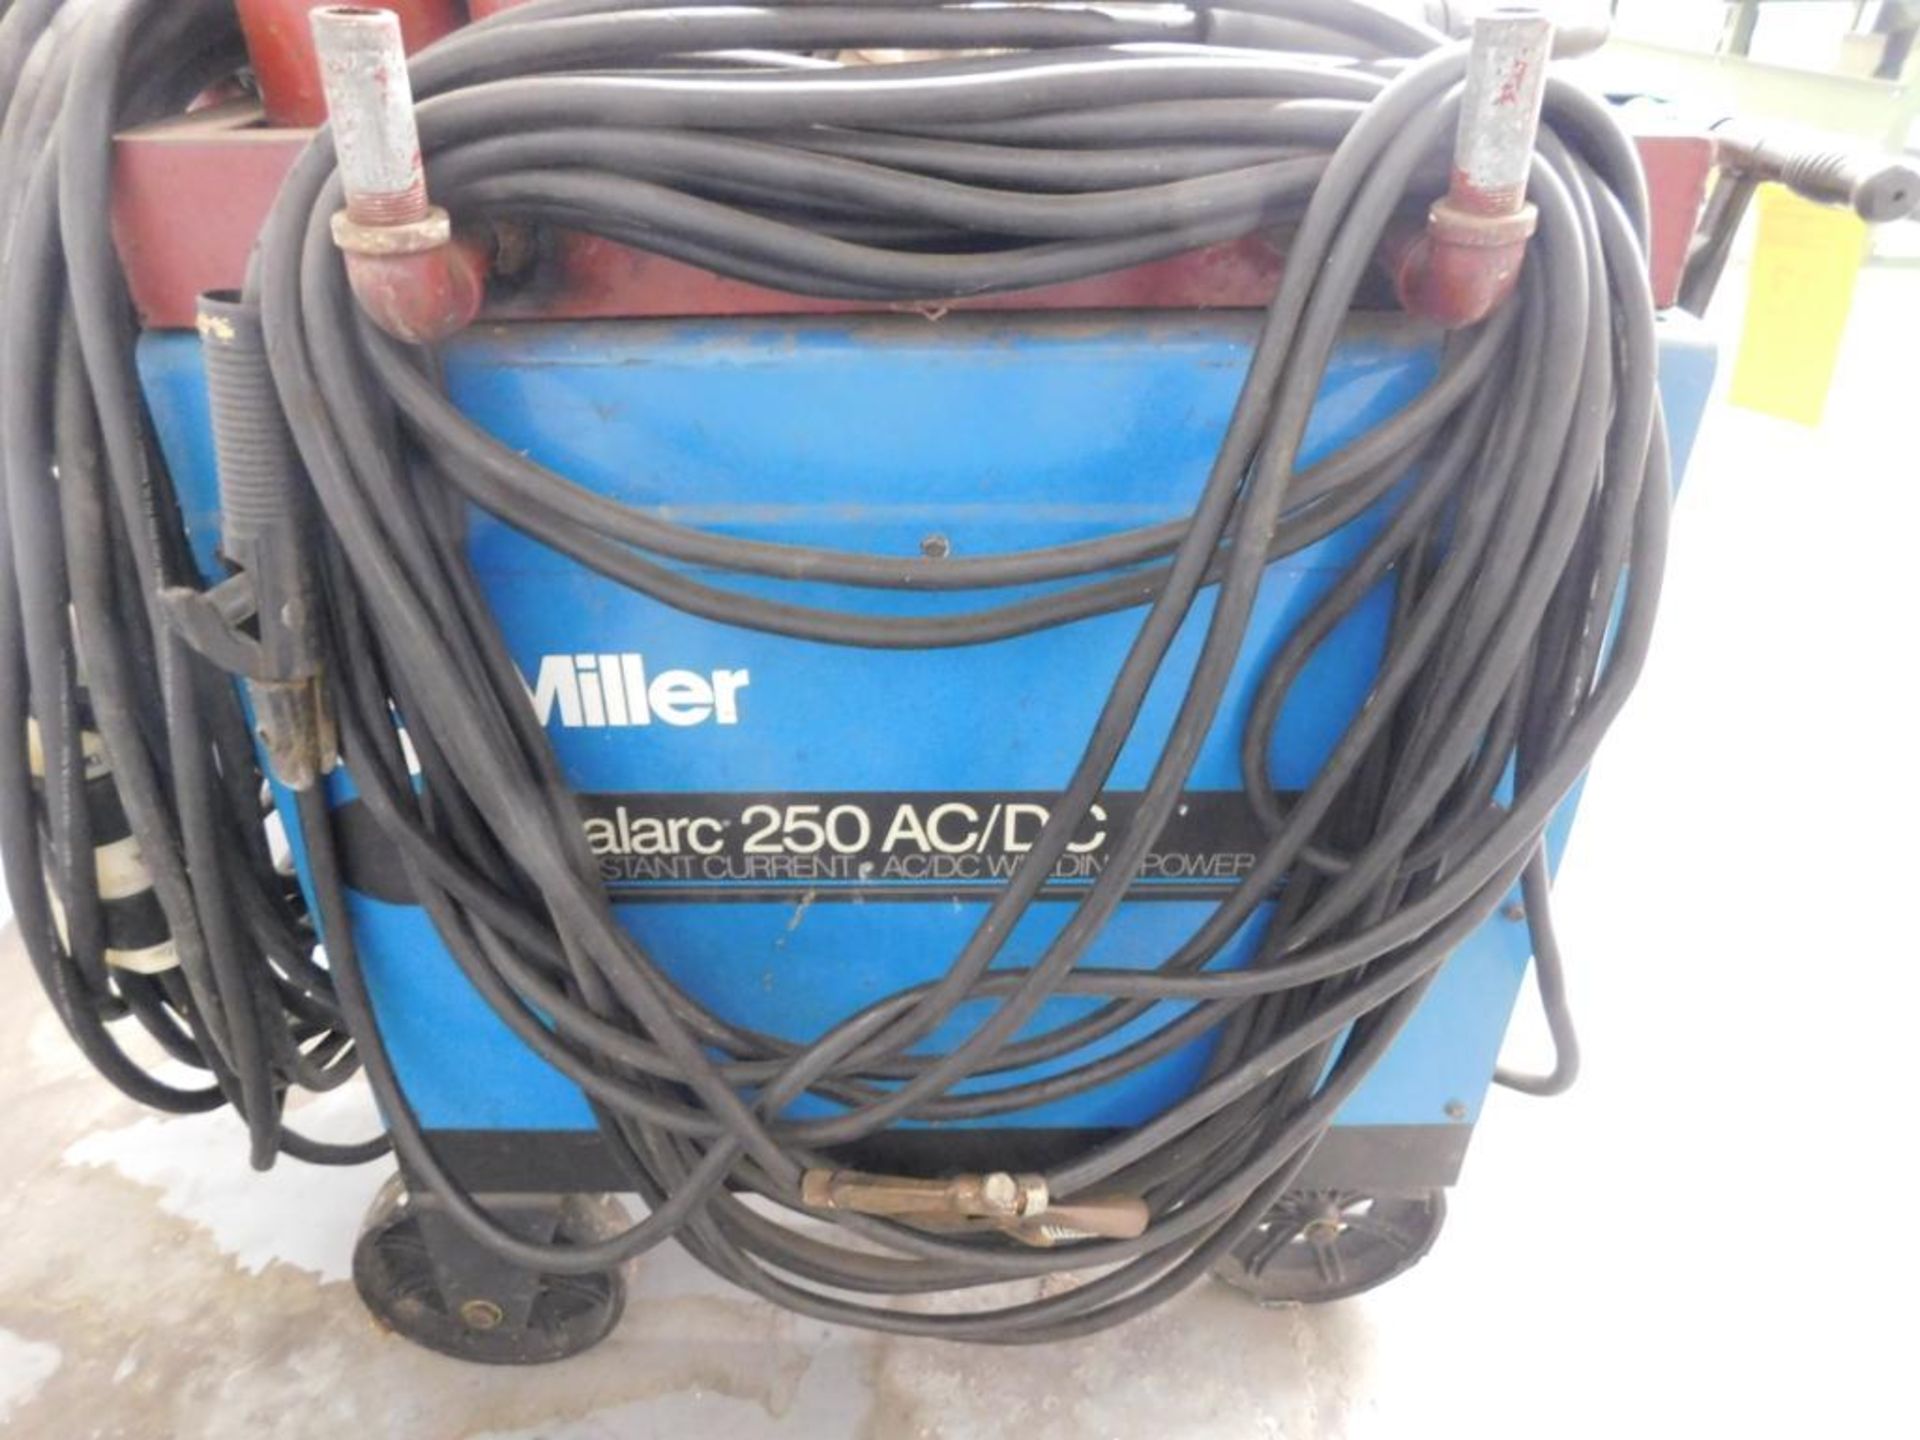 DIALARC 250 AC/DC CONSTANT CURRENT AC/DC ARC WELDING POWER SOURCE, S/N KE642080 - Image 3 of 4